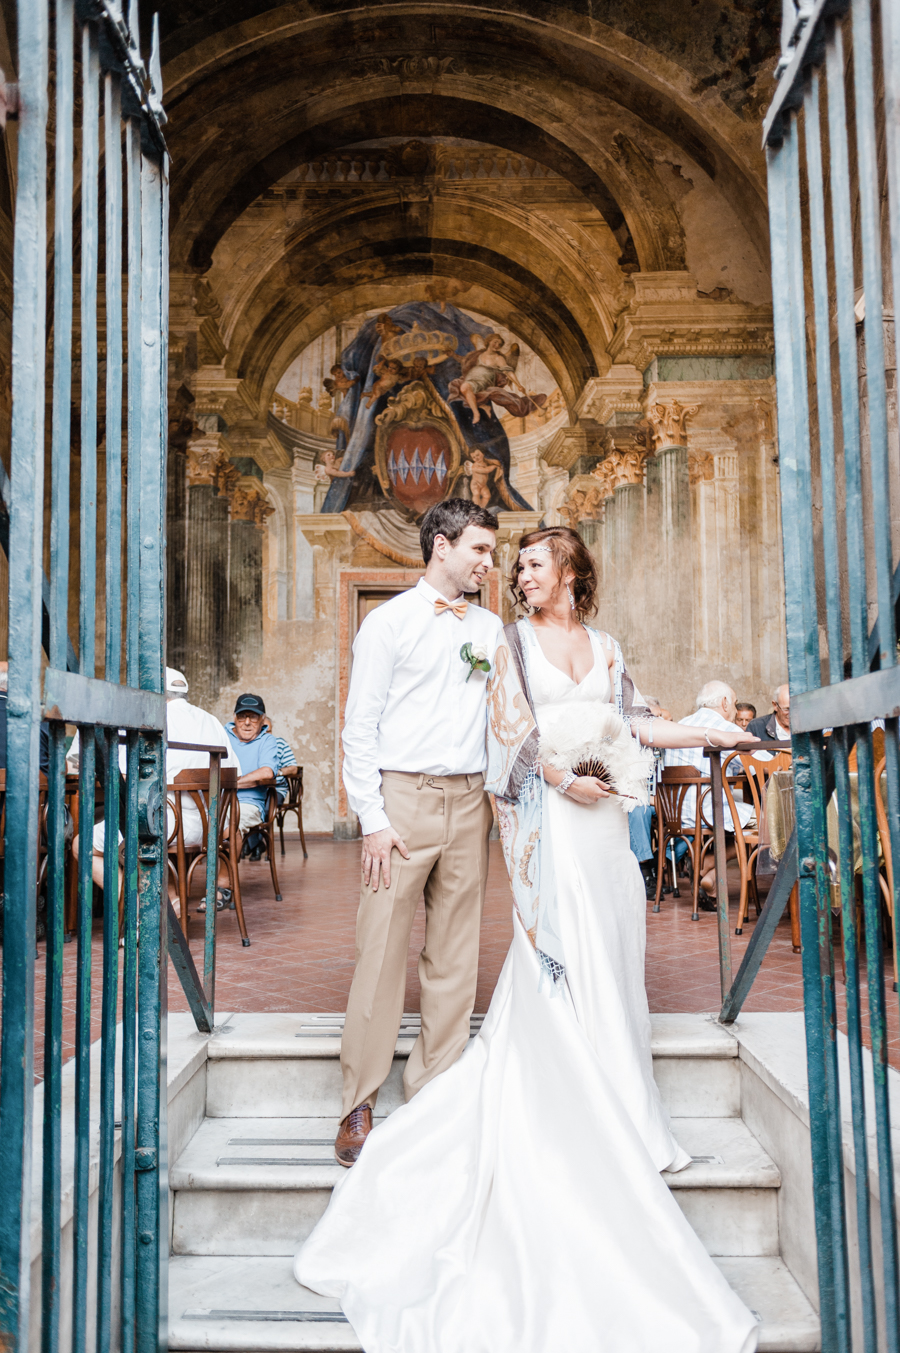 Luxury Elopement Packages - The pros & cons